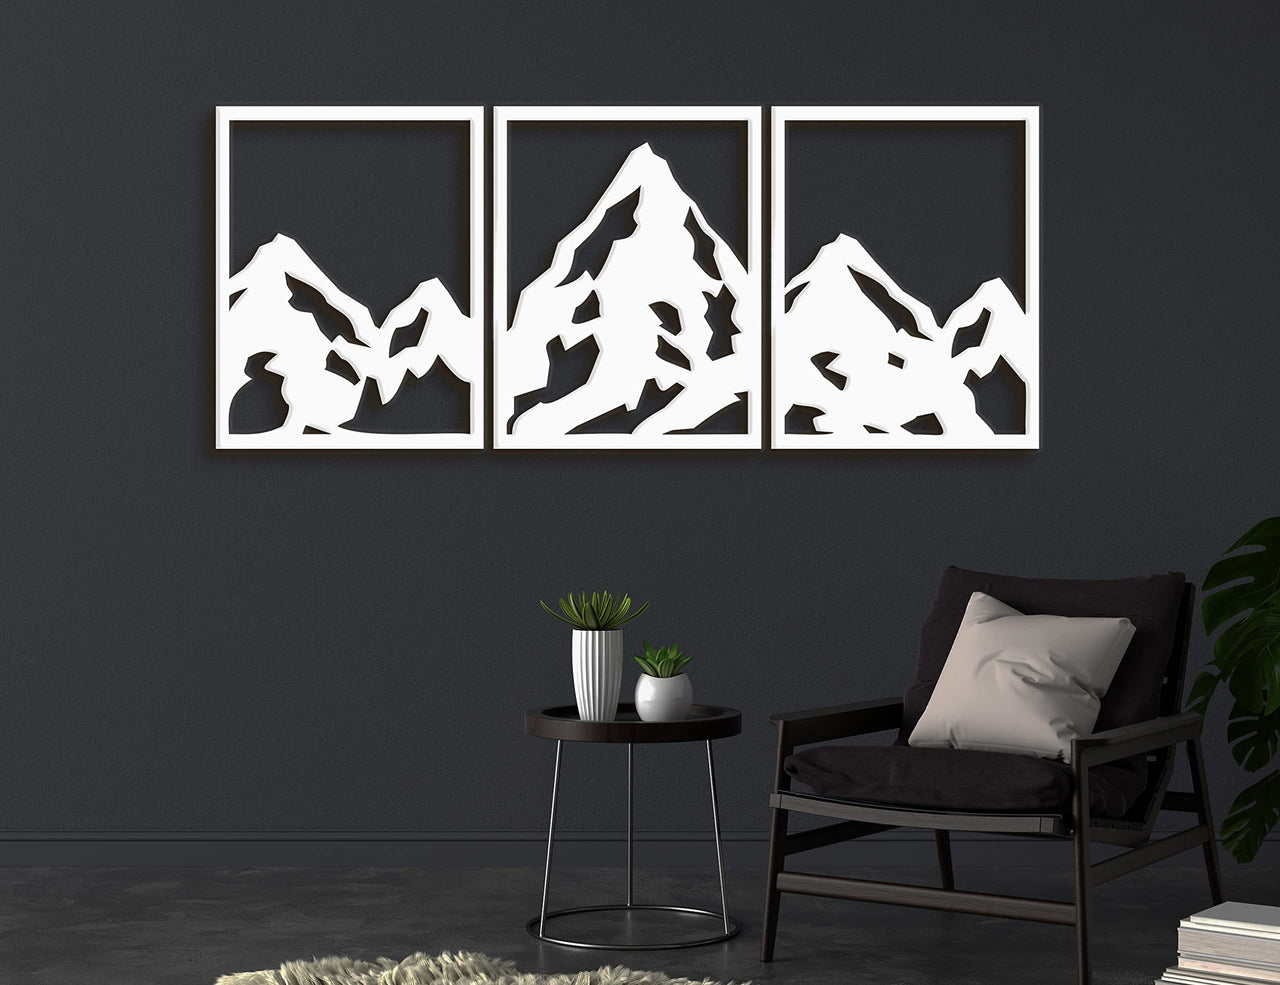 Large Mountain Wall Art 3 Piece - Abstract Mountain Wall Decor - Mountain Canvas Wall - Mountain Decor for Office - Snowy Mountain Wall Art - Rust Free Outdoor & Indoor Wall Decoration Piece